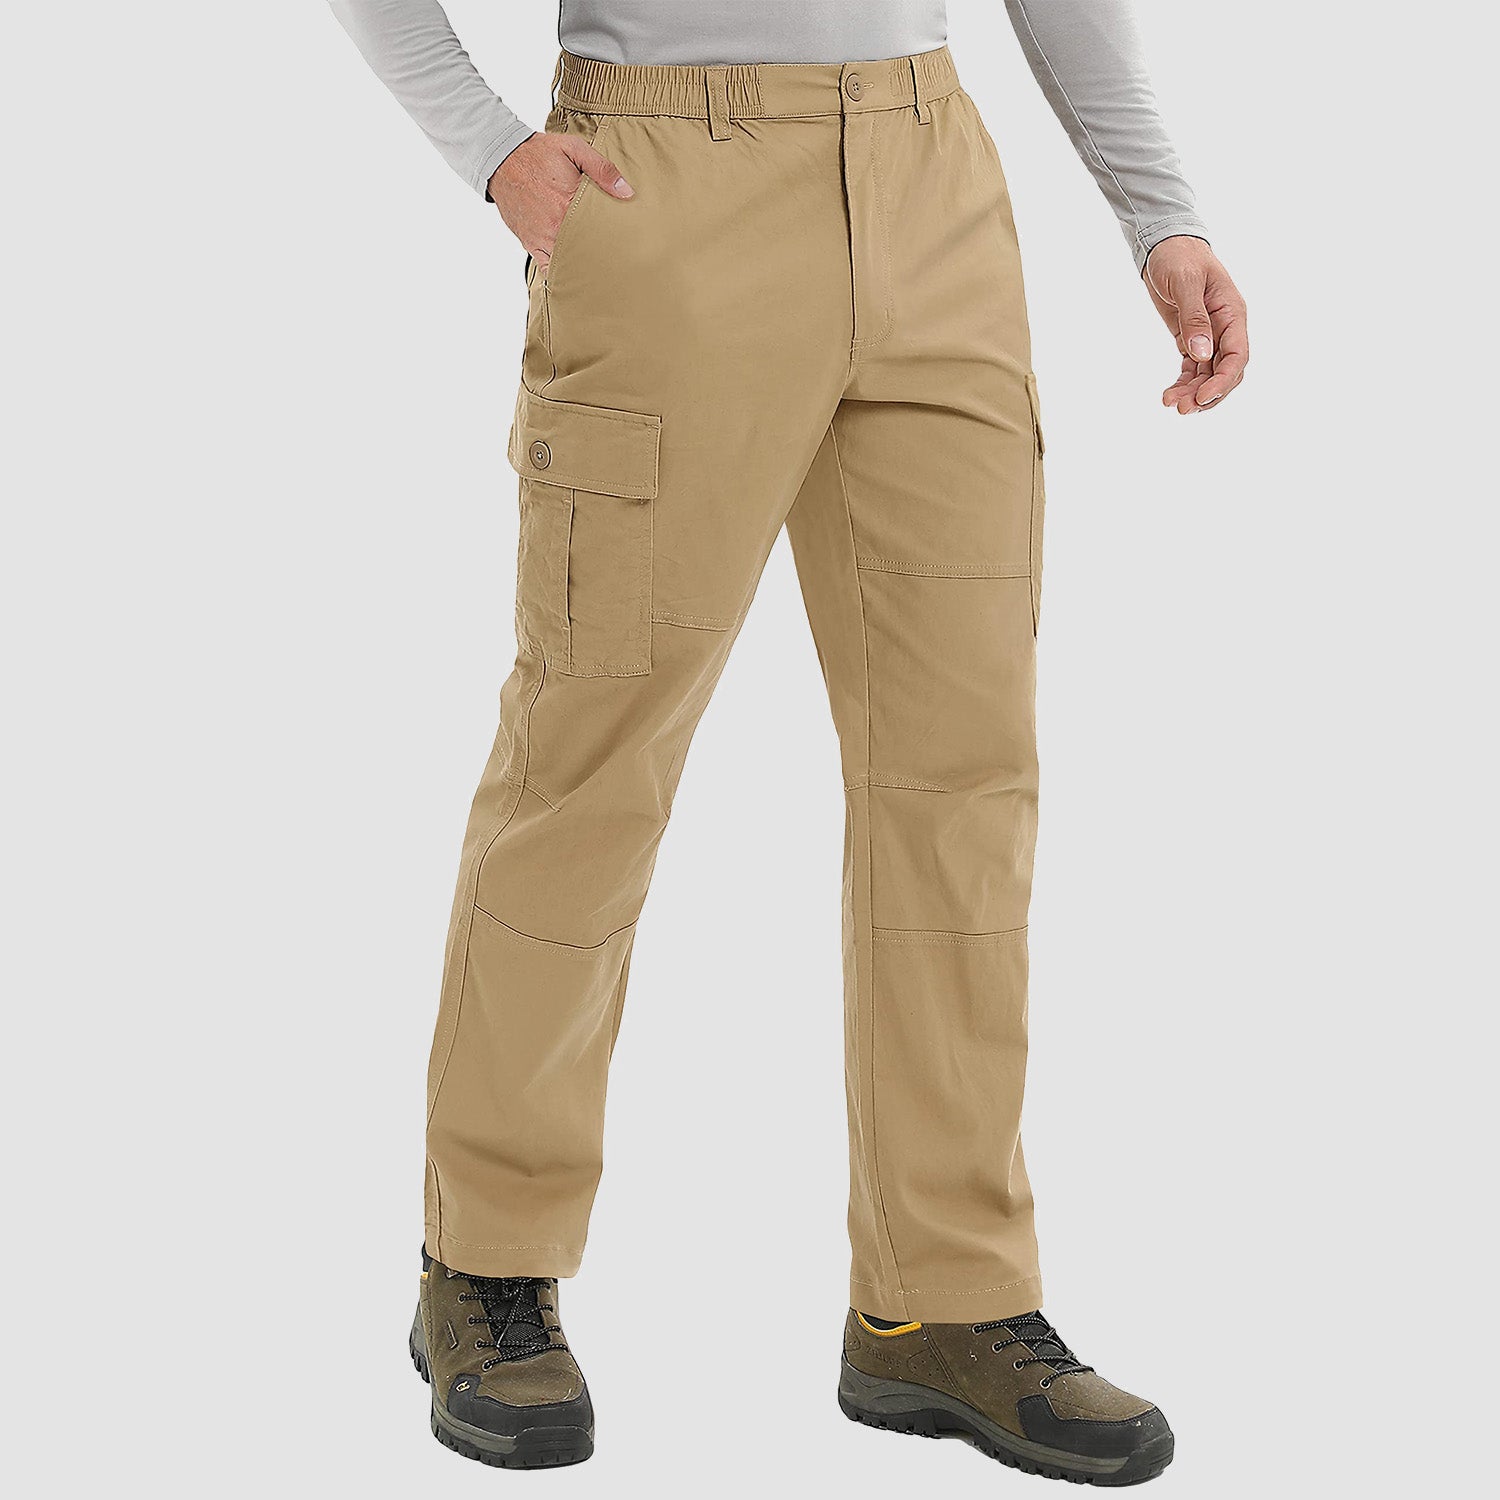 Men's Outdoor Cargo Pants Straight Fit with 6 Pockets Elastic Waist Fishing Travel Work Pants